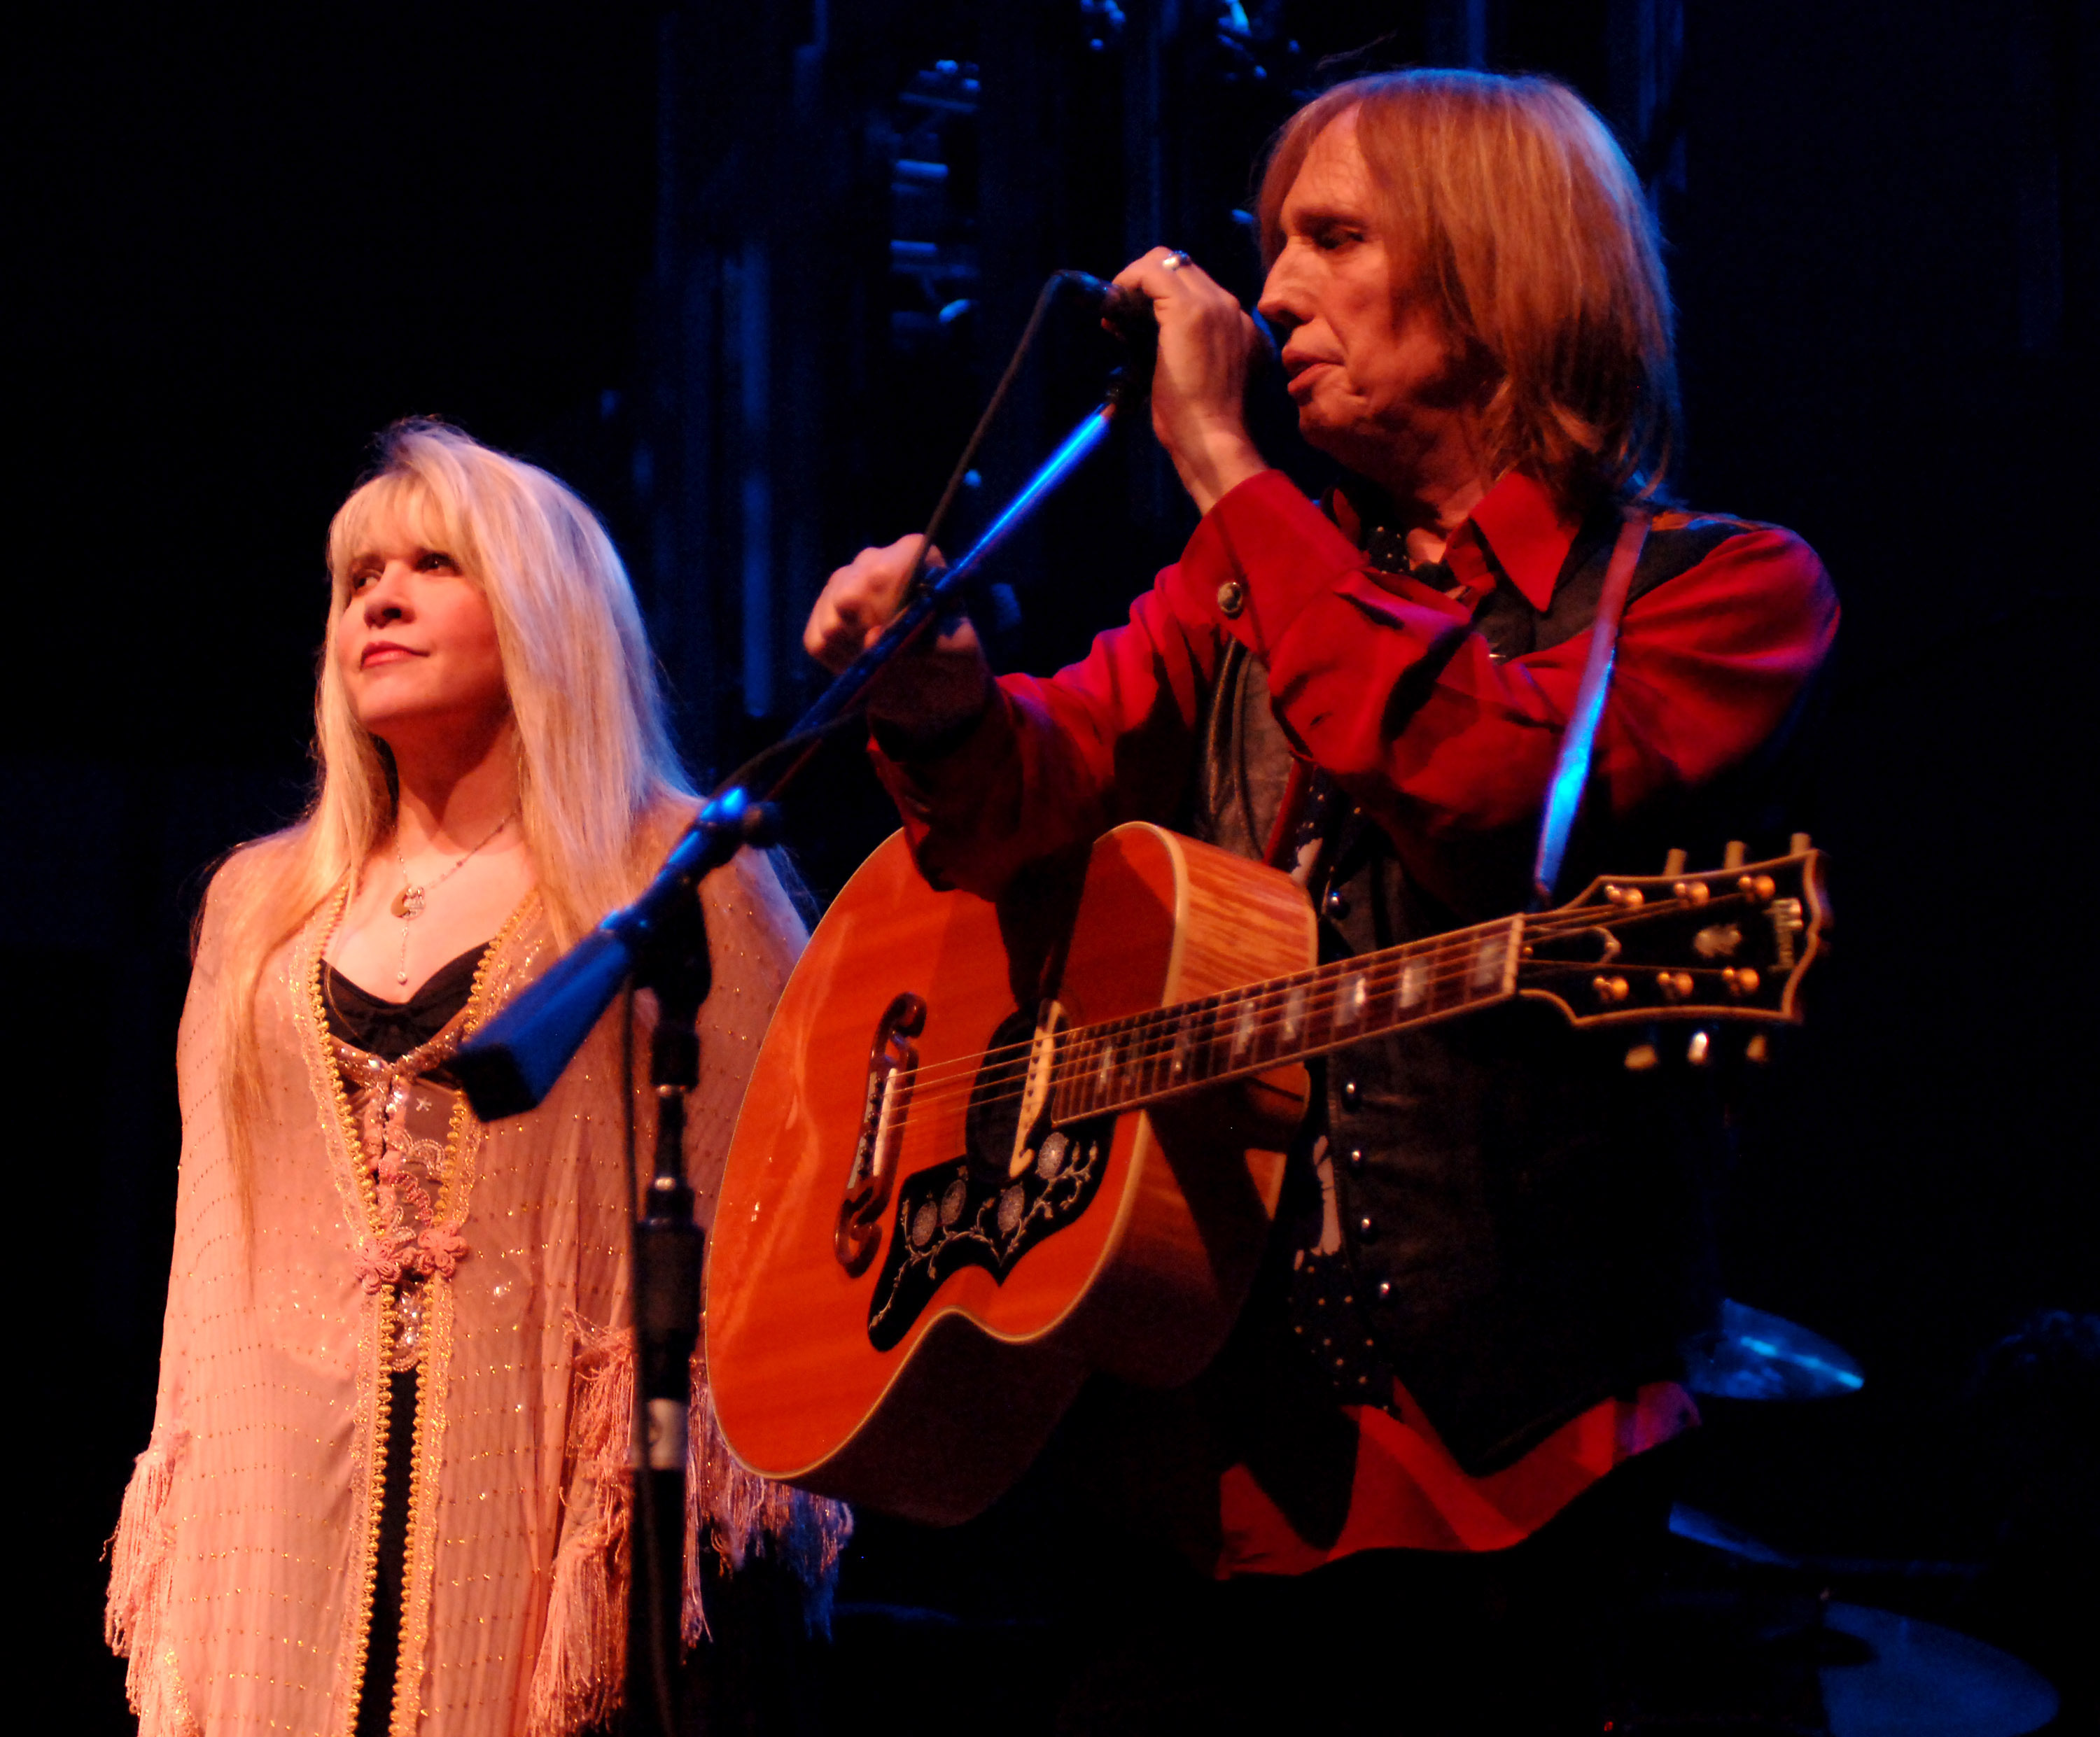 Stevie Nicks stands next to Tom Petty who has a guitar and adjusts a microphone. 